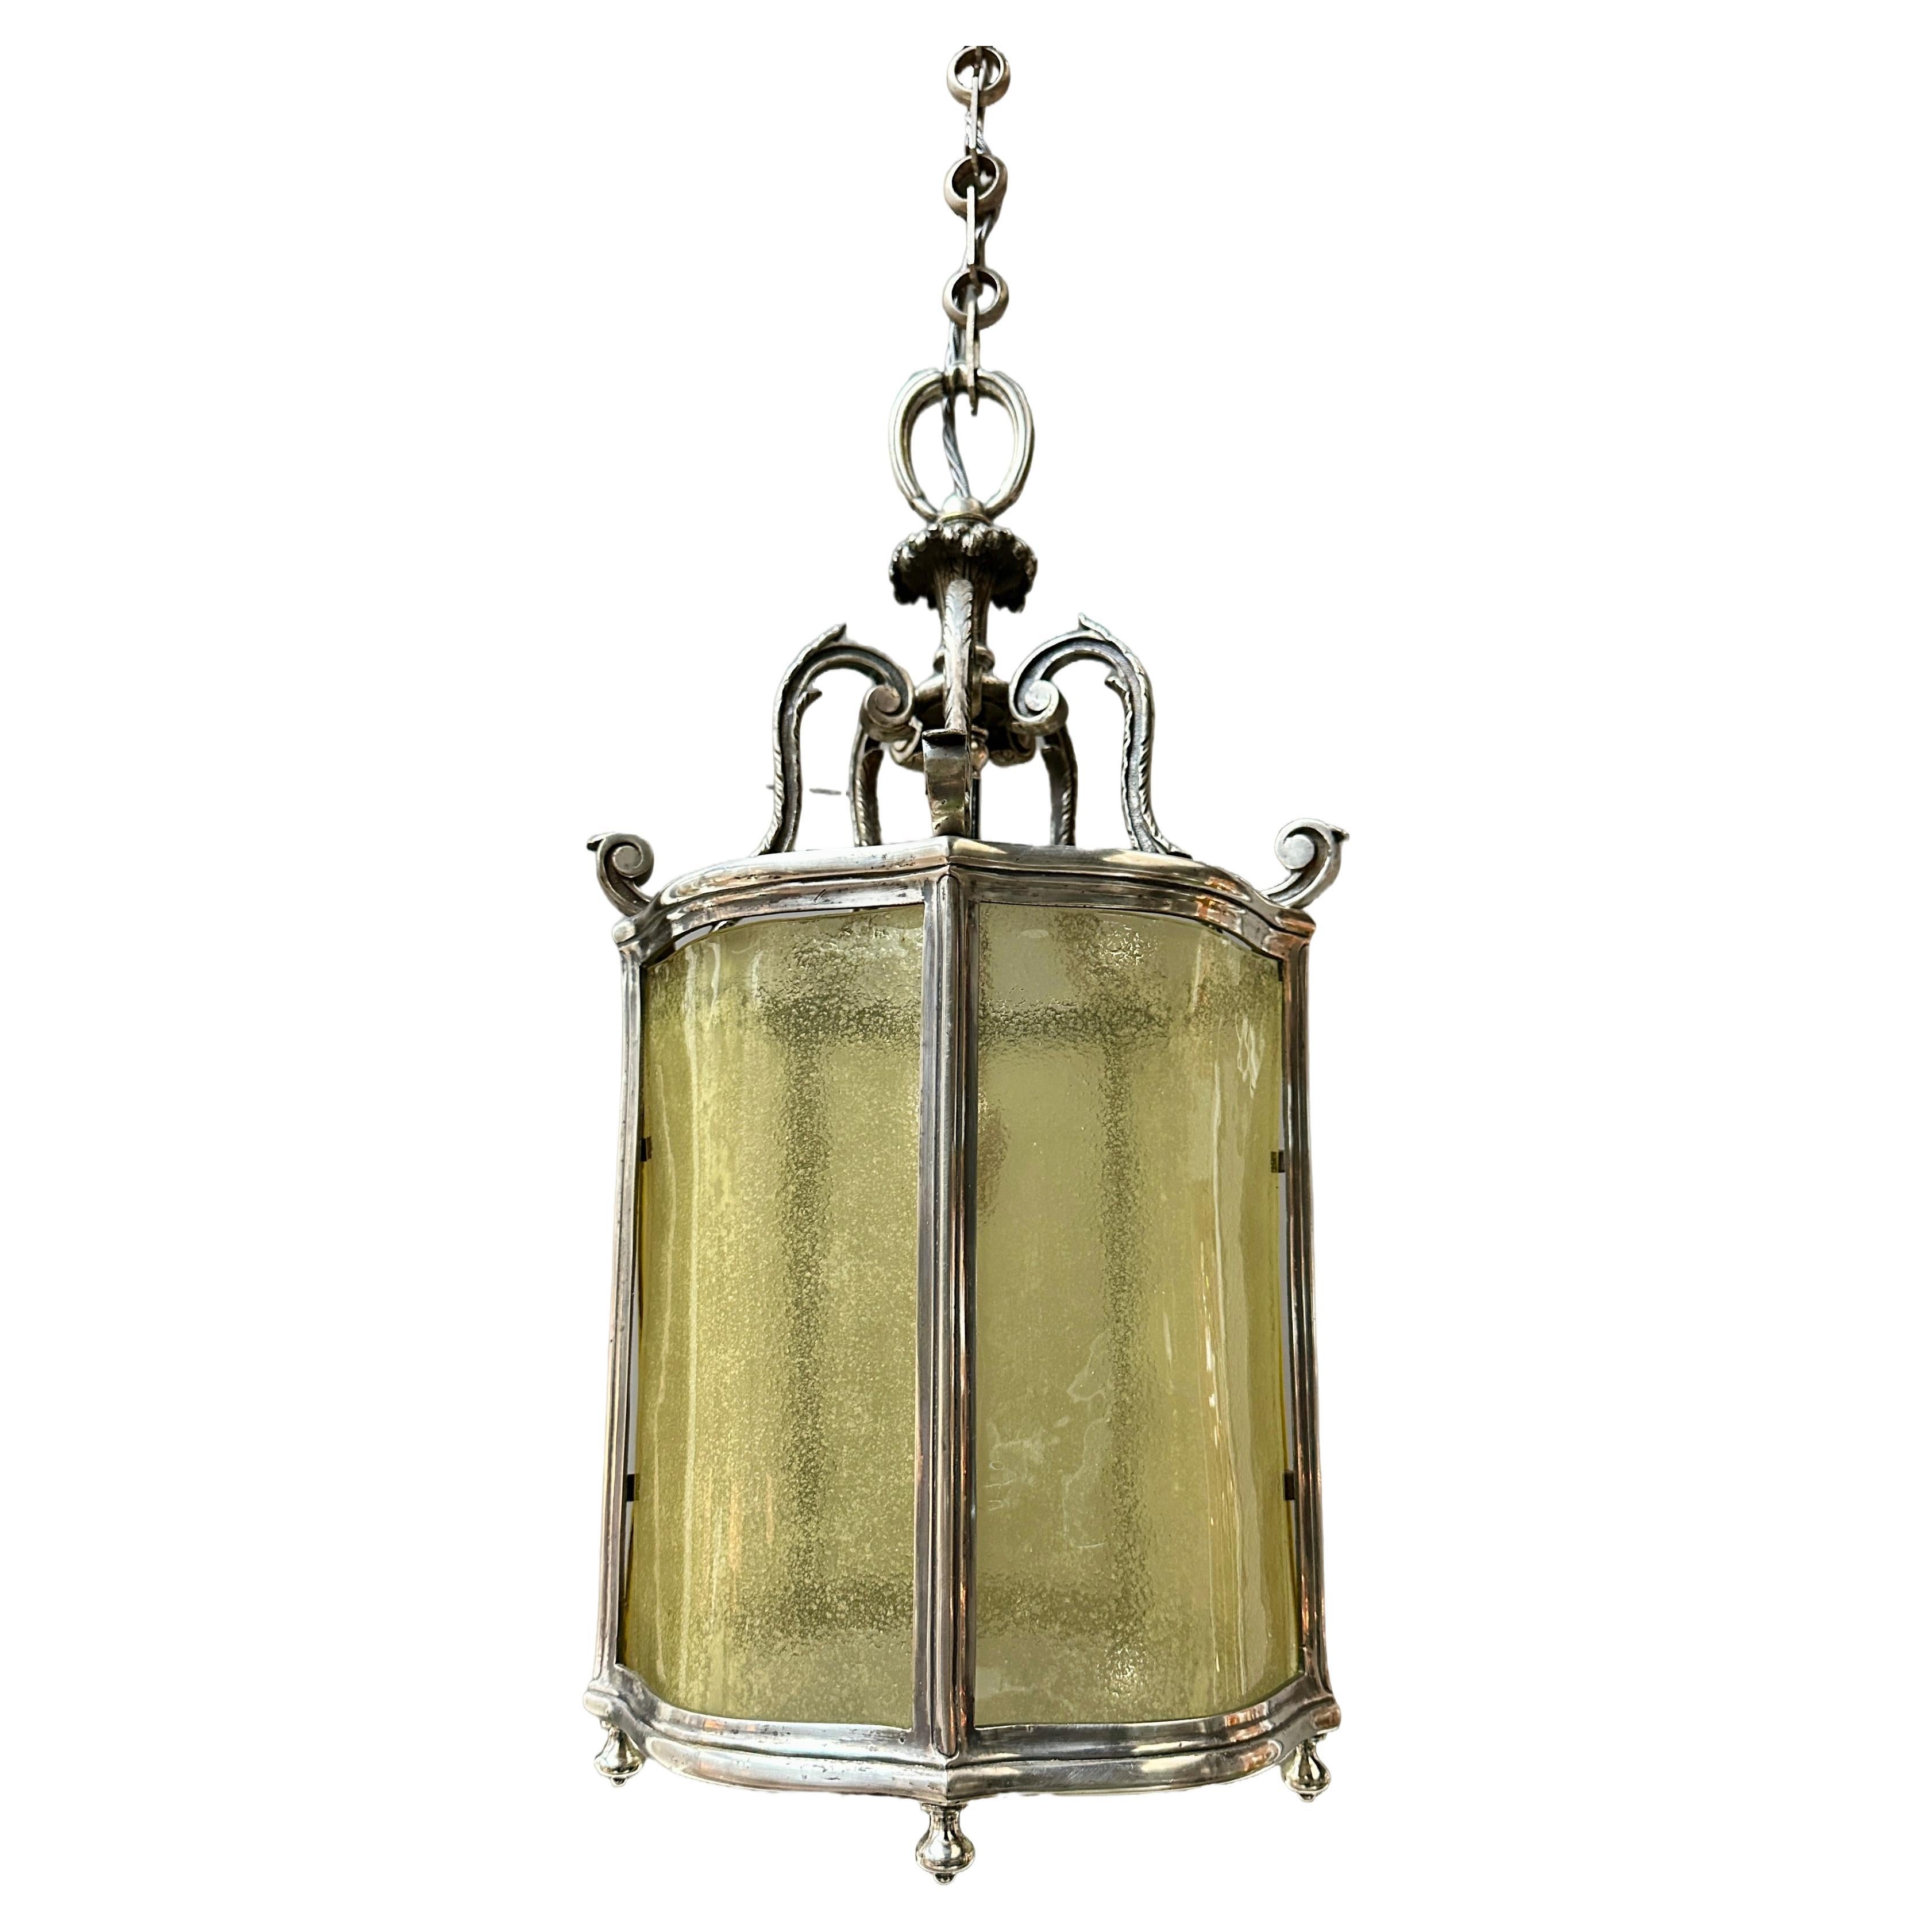 A Classical Nickel And Curved Murano Glass Italian Lantern  For Sale